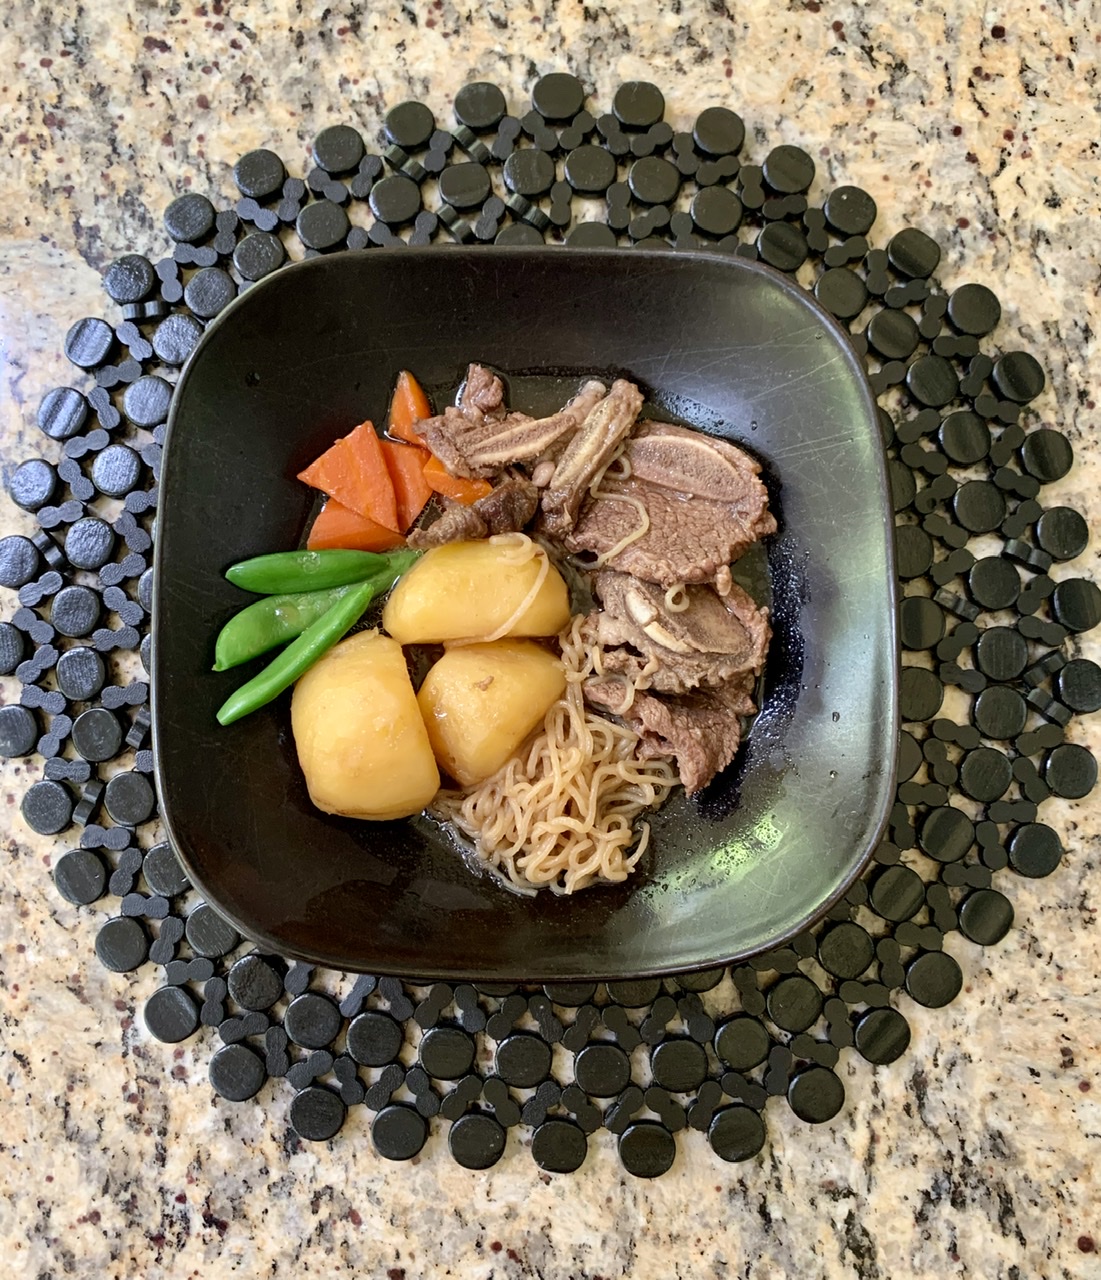 Japanese Nikujaga: The Best Meat And Potatoes Comfort Dish